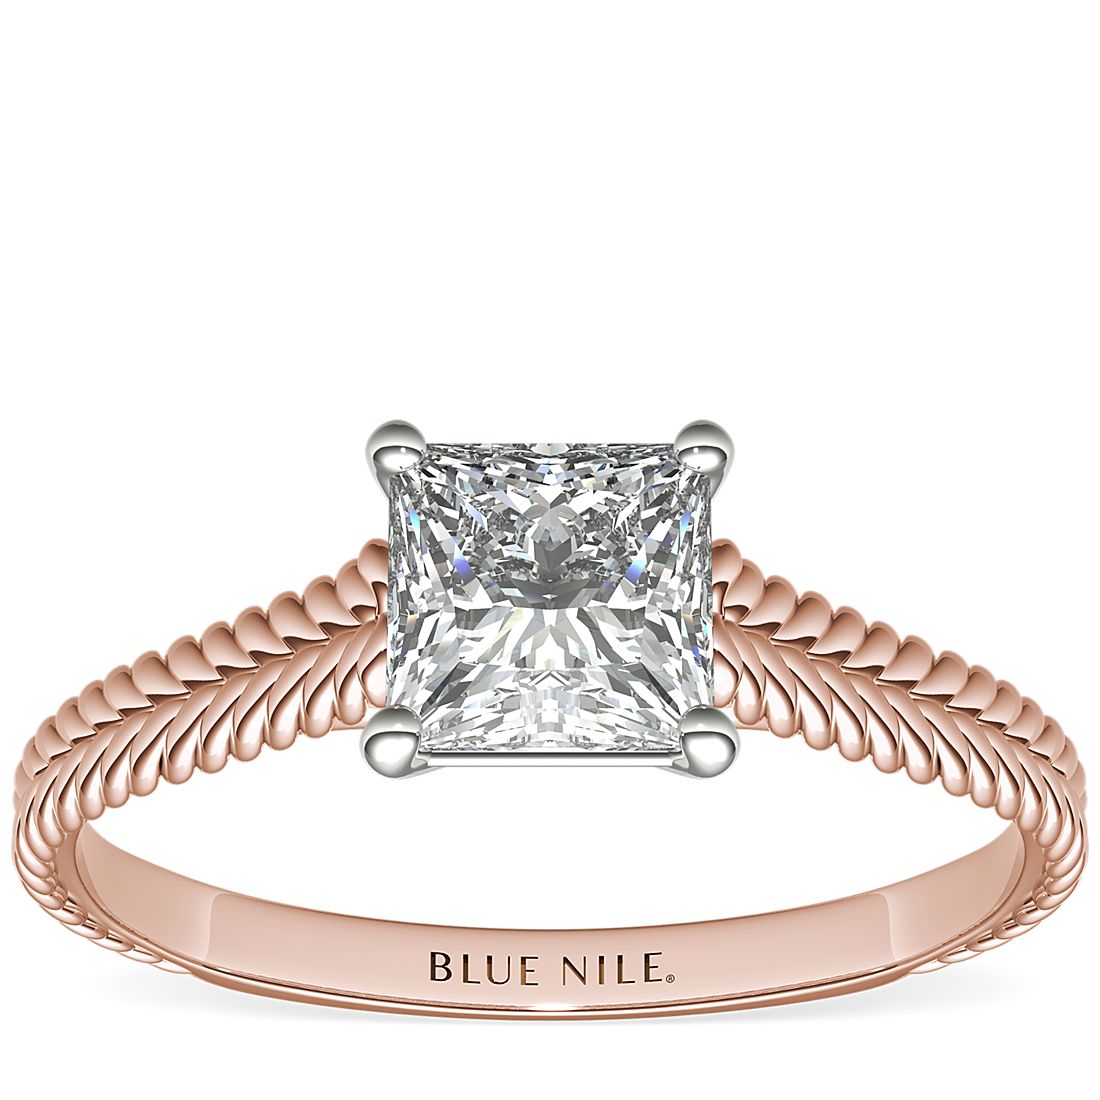 Blue Nile Braided Cathedral Solitaire 1.20-Carat Radiant-Cut Diamond Ring in Rose Gold